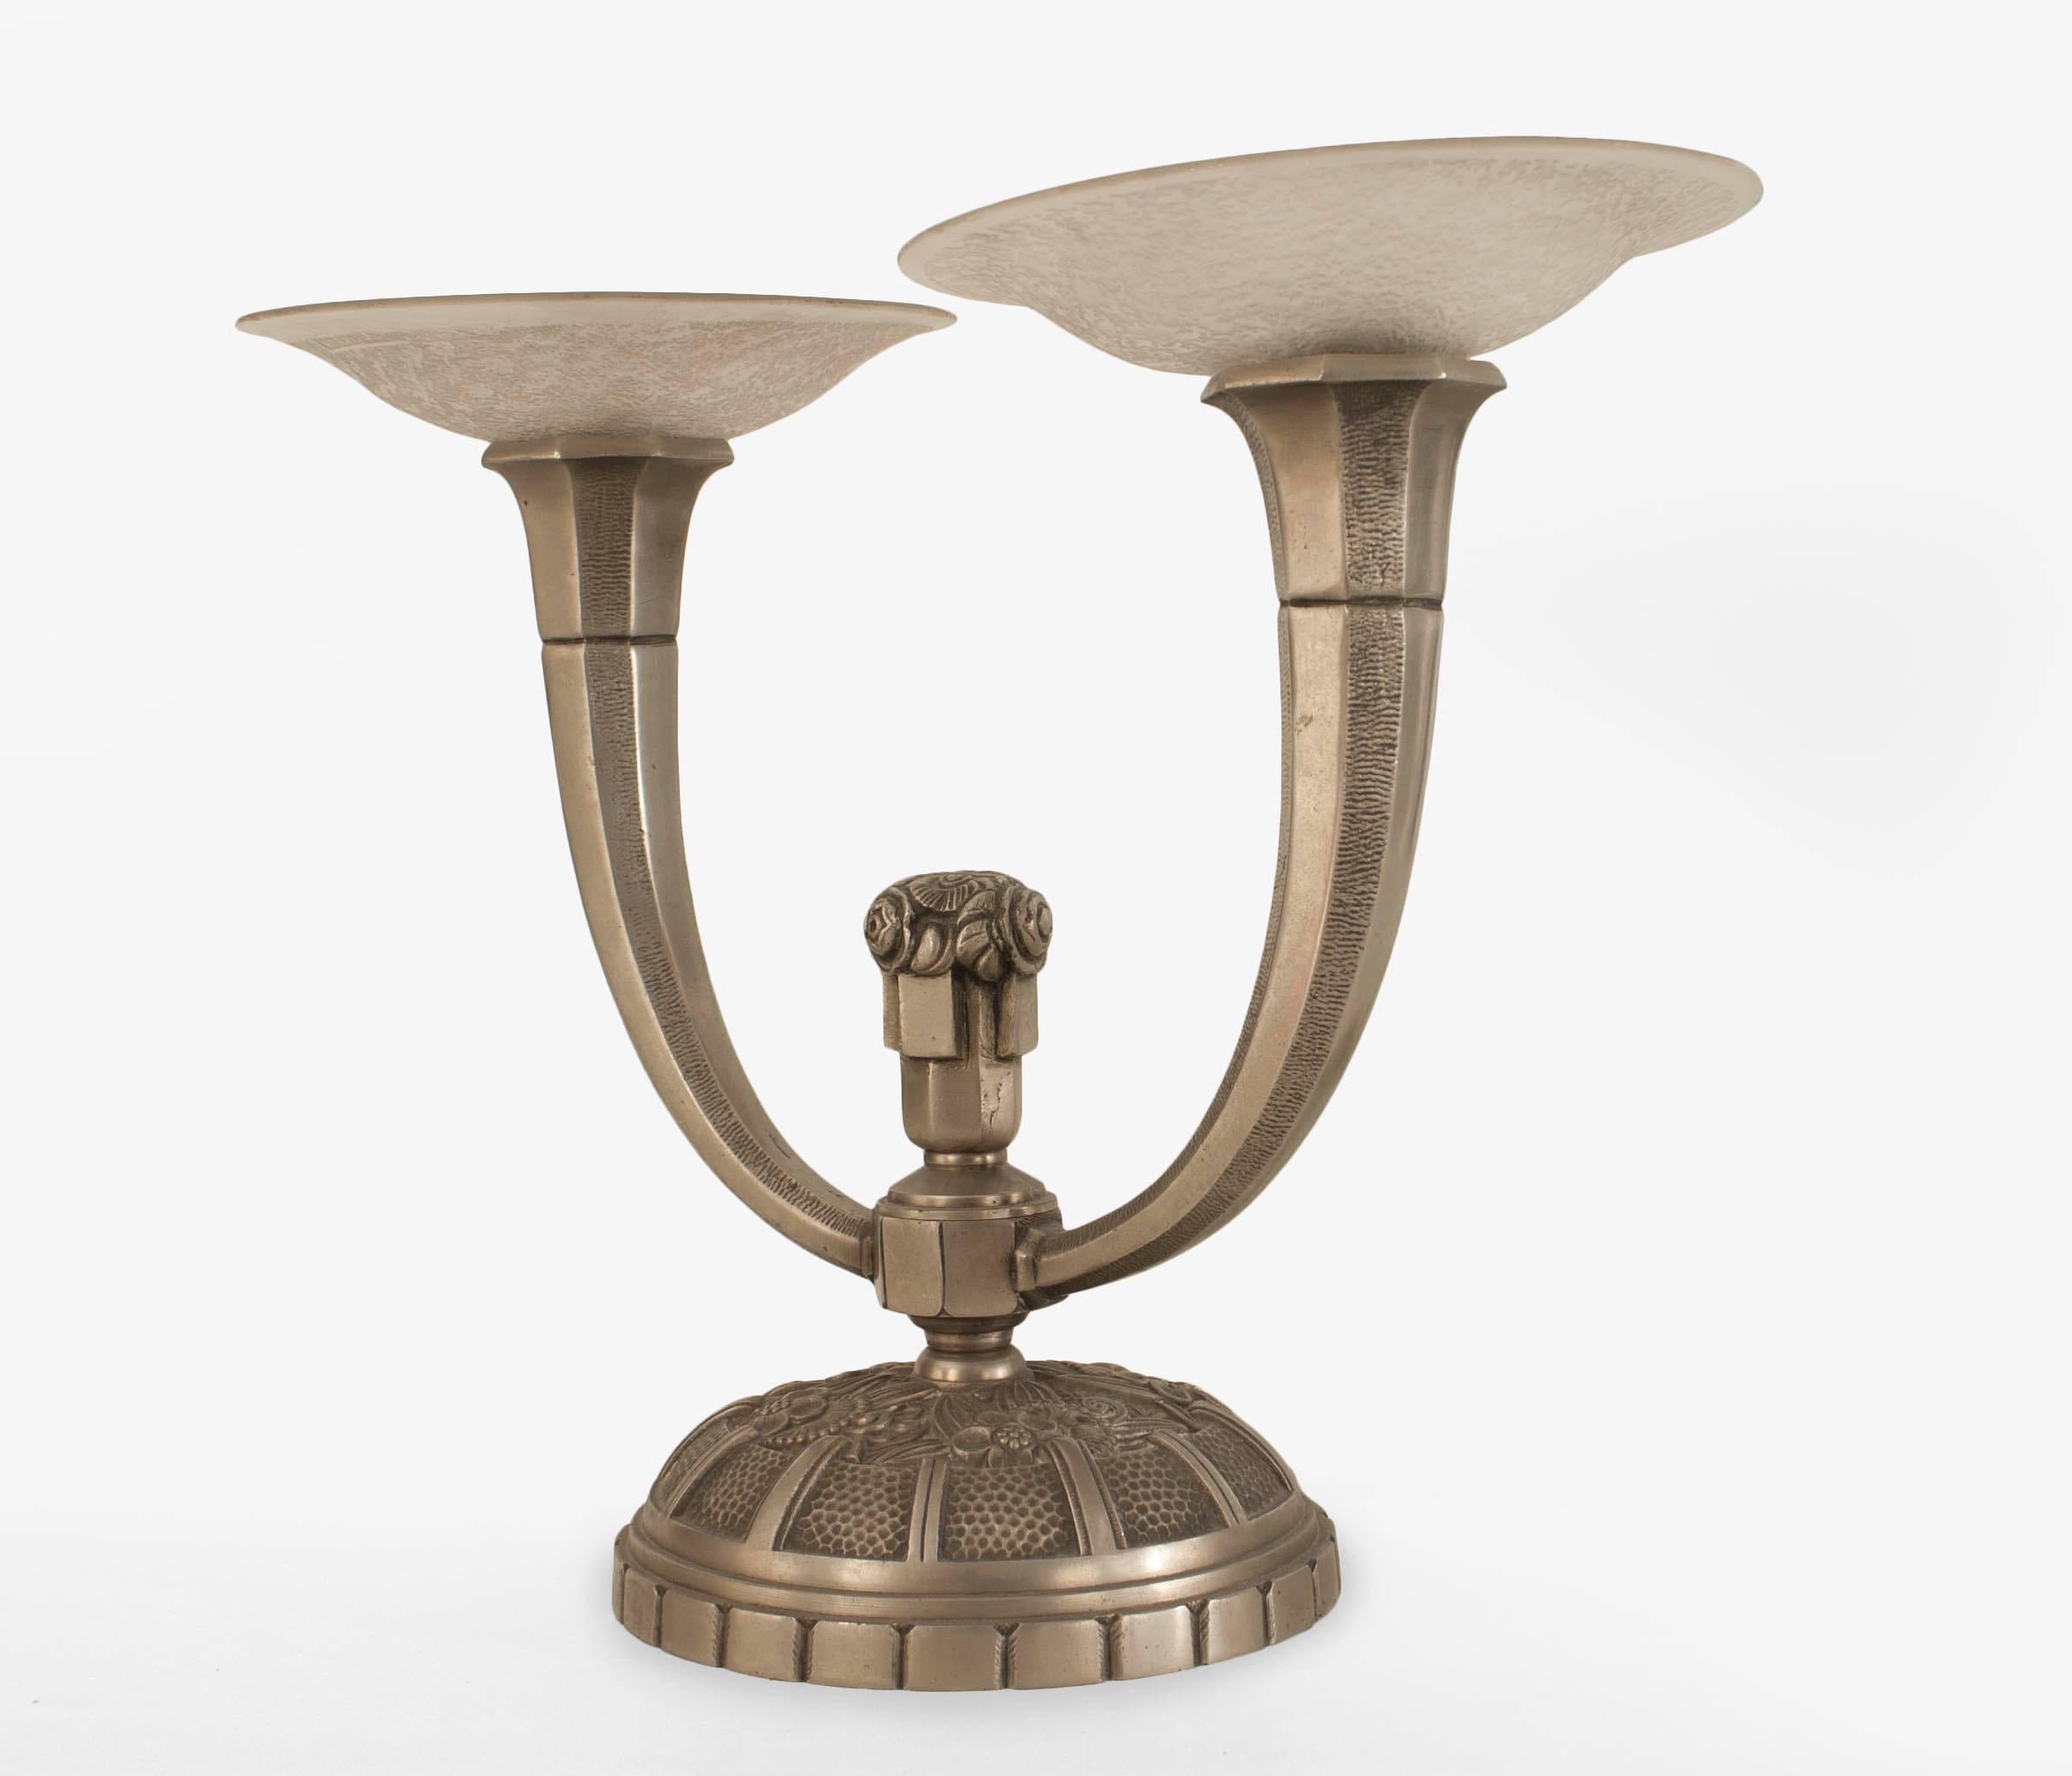 Pair of French Art Deco nickel plated 2 arm candelabra (wired) with center finial and round base having a floral design and supporting textured frosted glass round bobeches (signed MULLER FRERES)(PRICED AS Pair)
